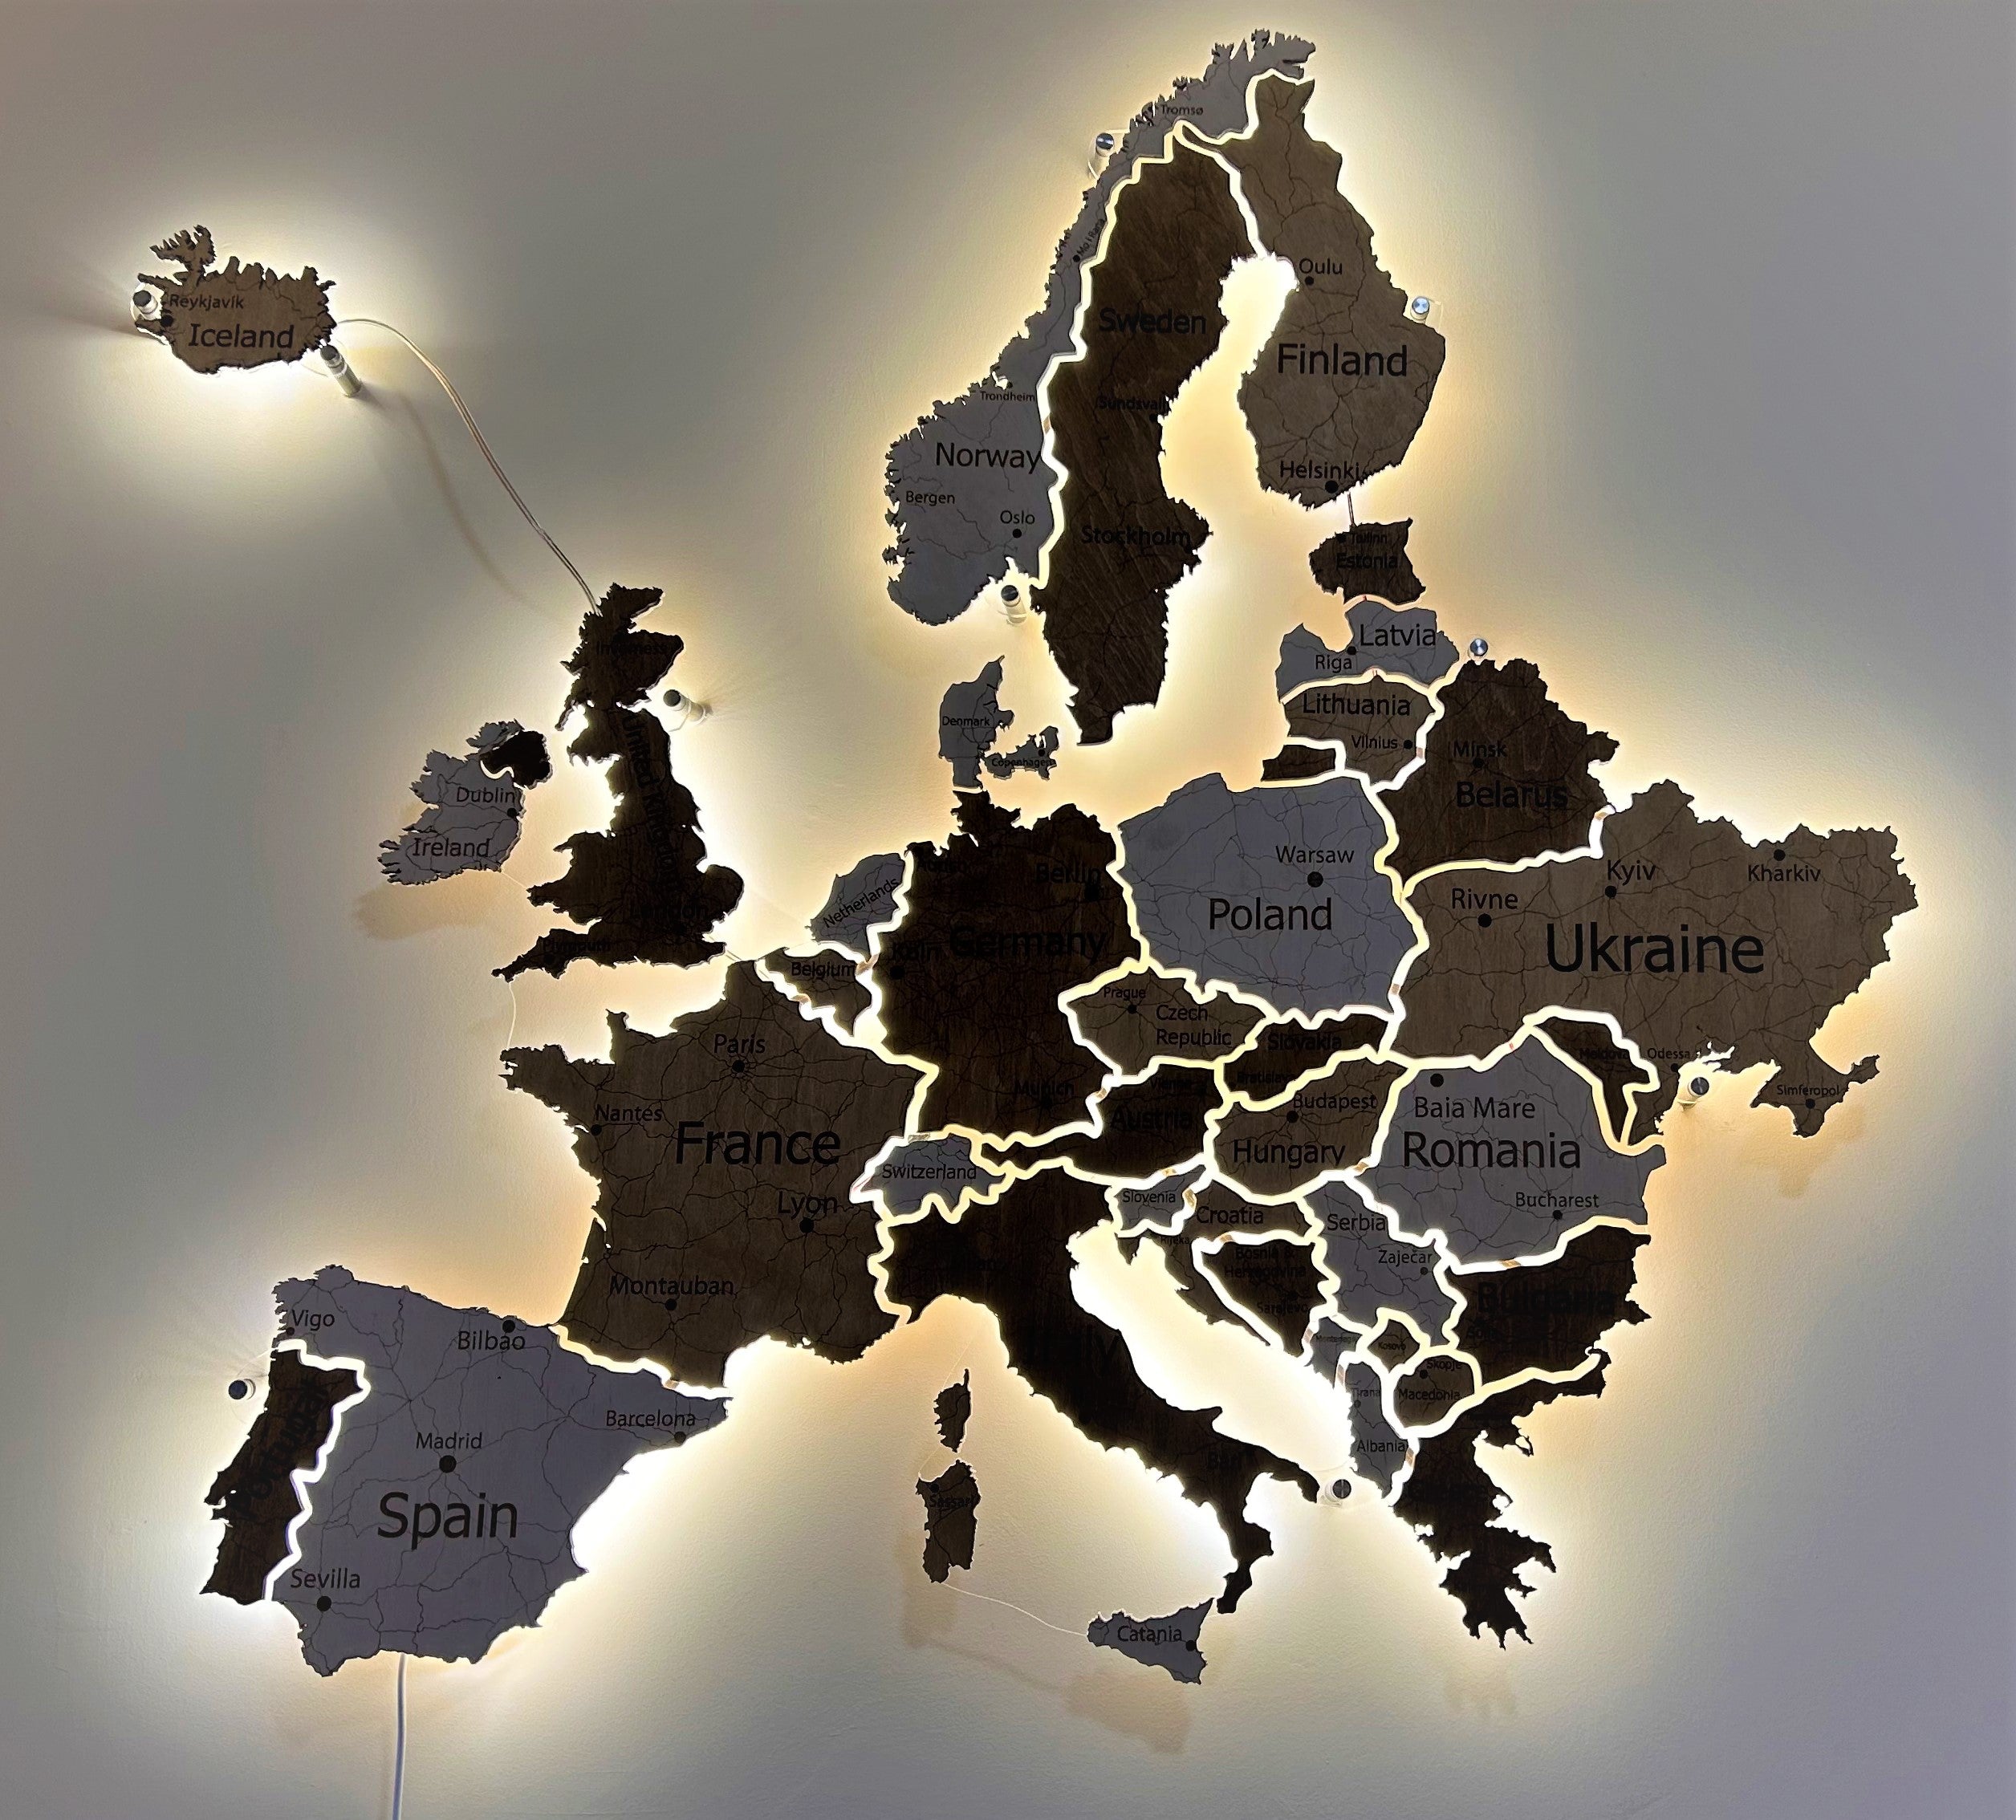 europe-led-map-on-acrylic-glass-with-backlighting-between-countries-color-terra